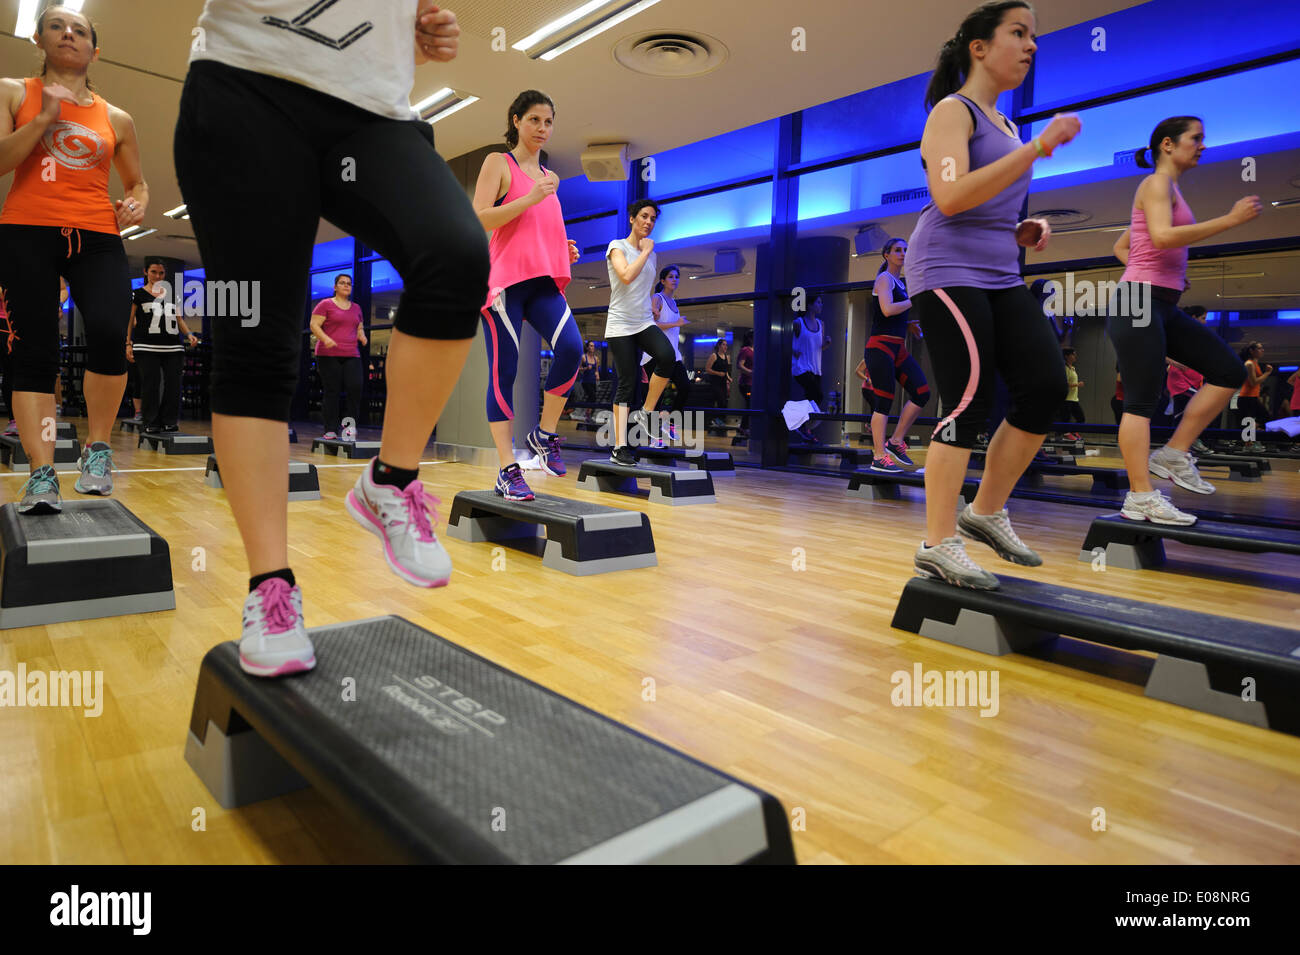 Step aerobics fitness class at the gym Stock Photo